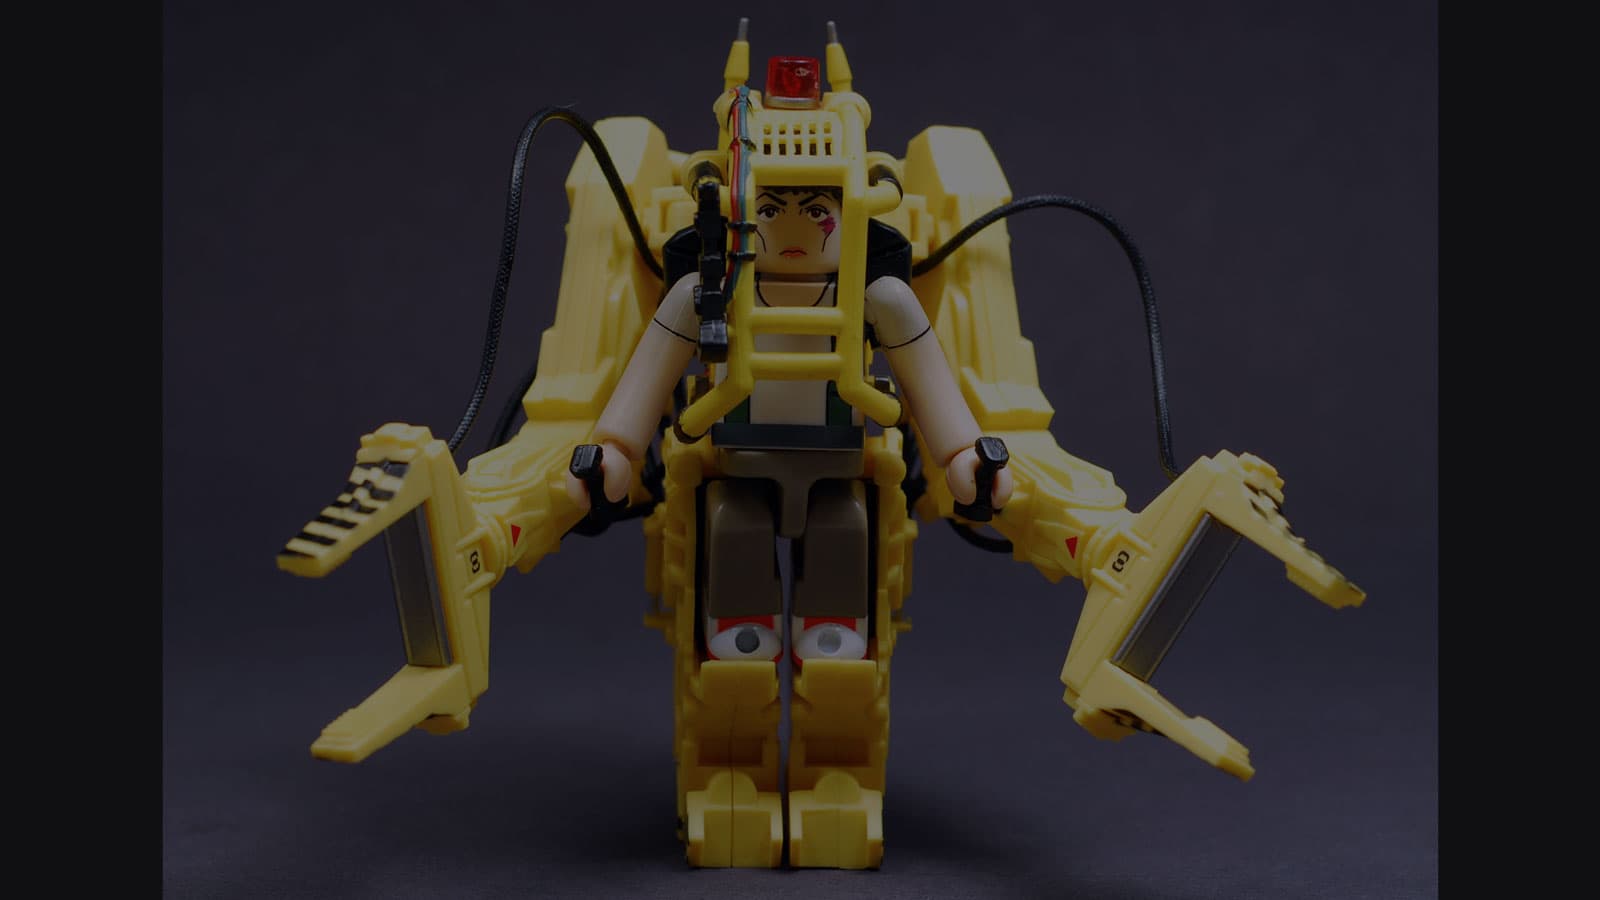 model of Ripley in the power loader from Aliens; photo by Flickr user GogDog